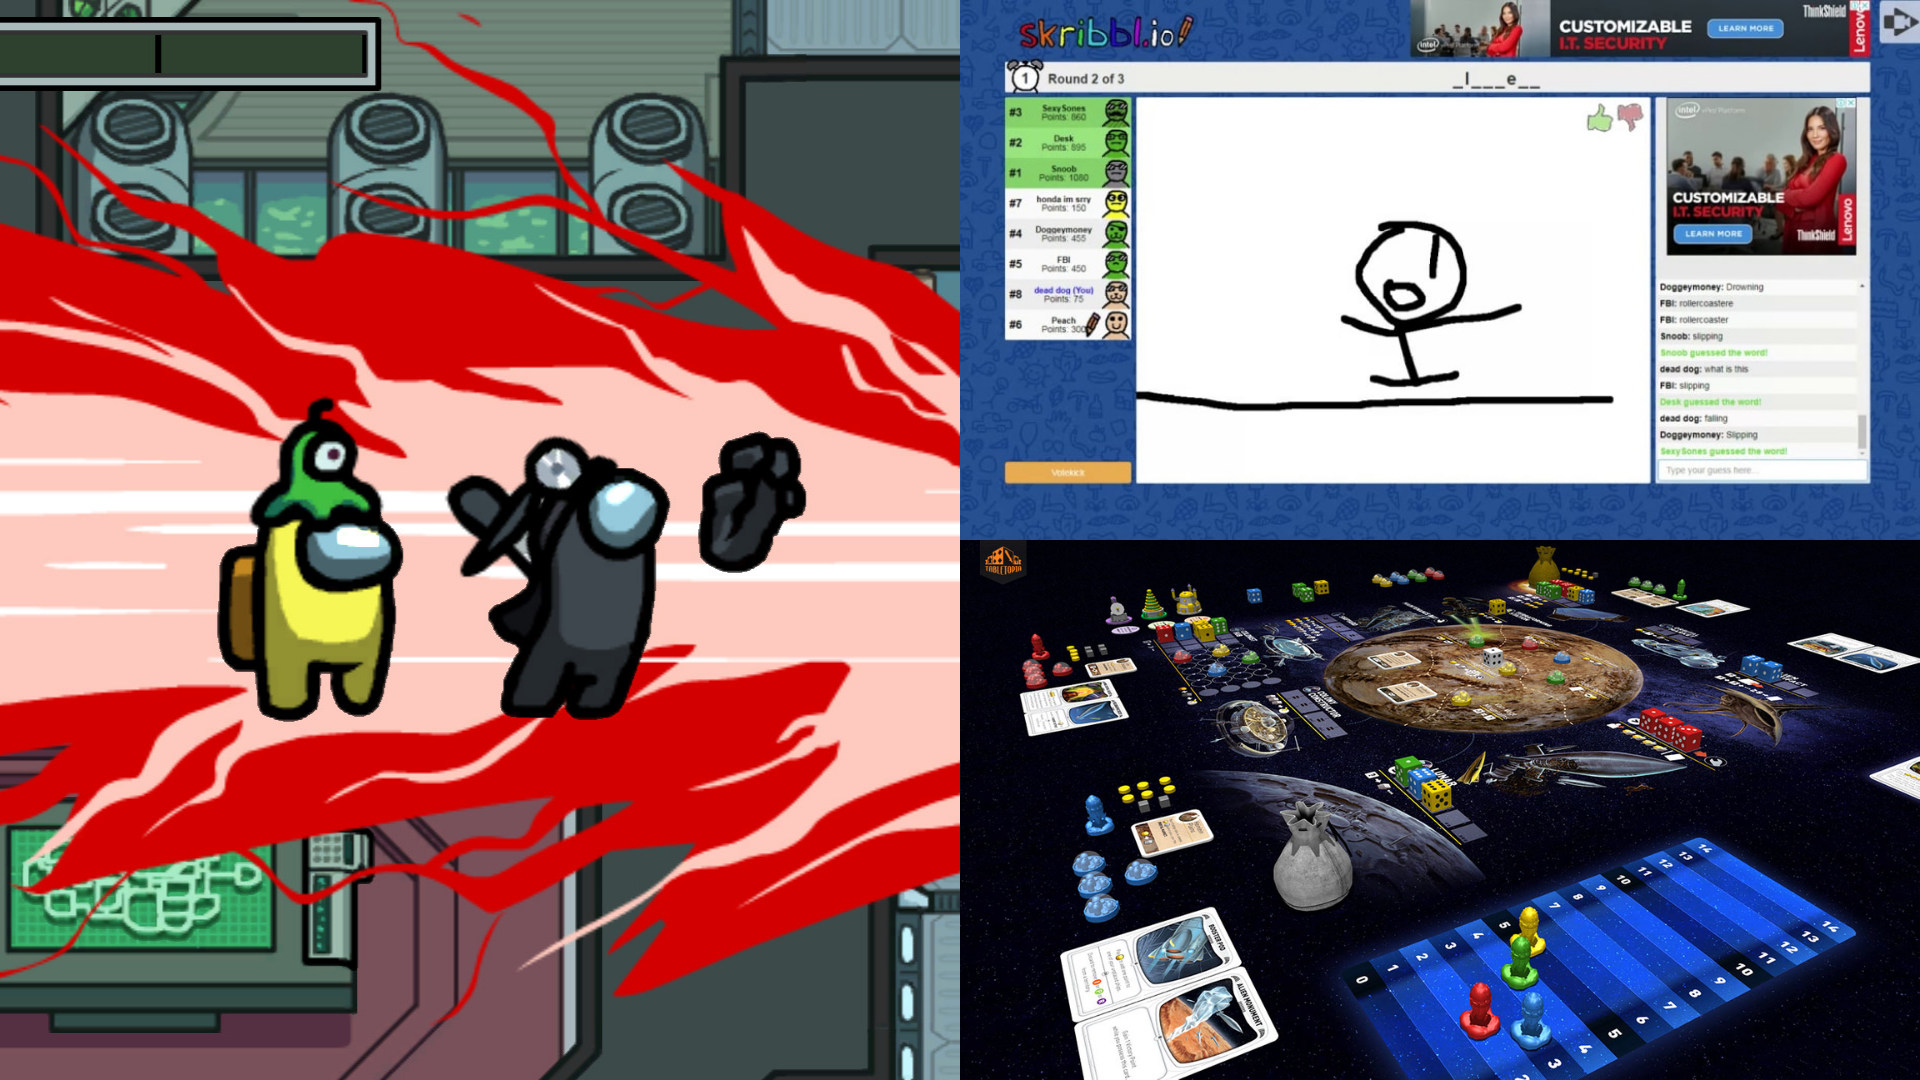 15 Best Free Online Games You Can Play With Your Friends This CMCO